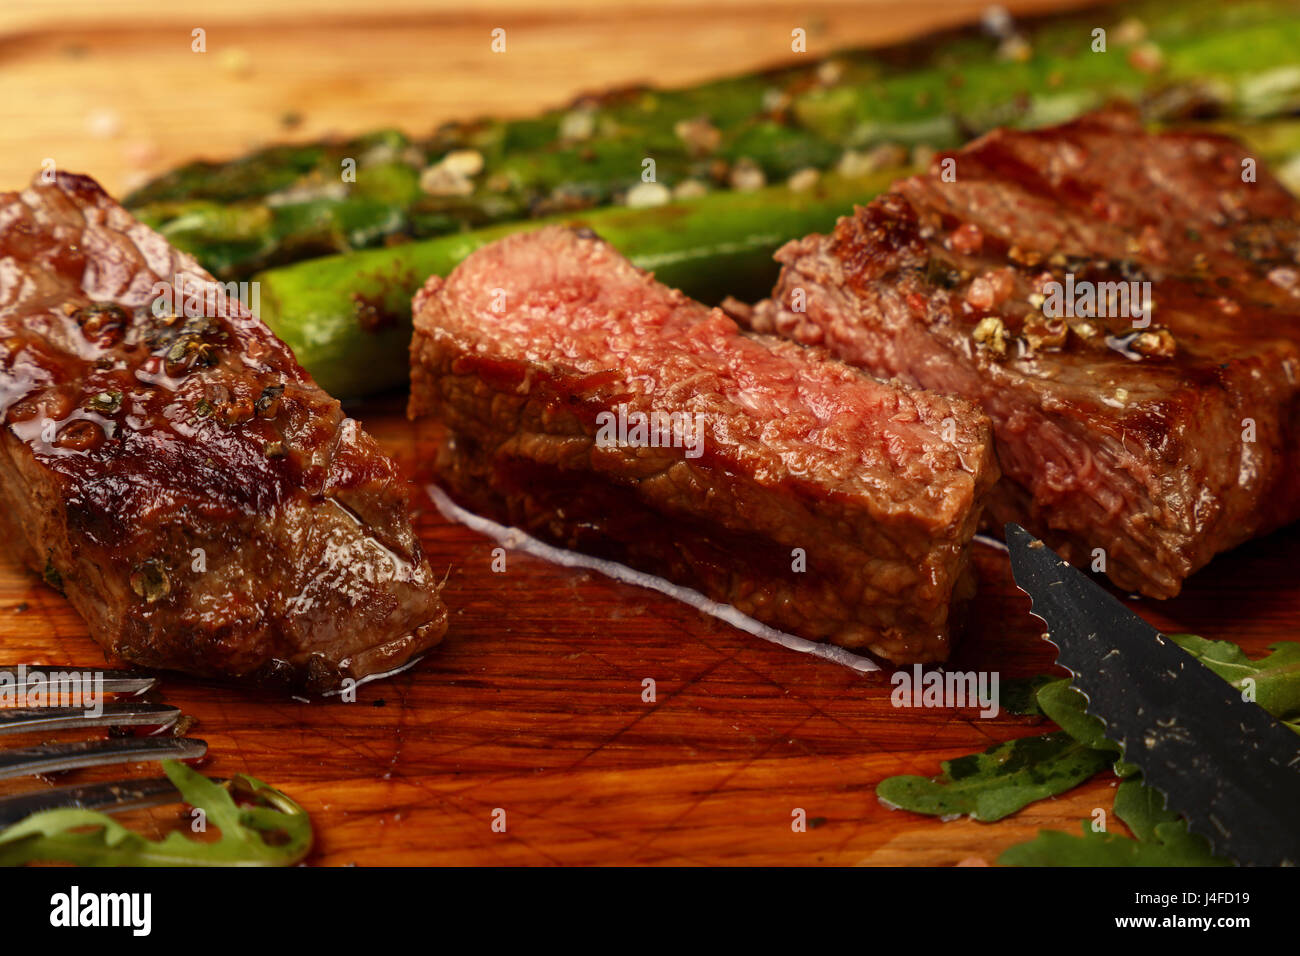 Cut slices of grilled juicy medium cooked beefsteak served on wooden board with fresh green rocket salad, fork and knife, close up, high angle view Stock Photo